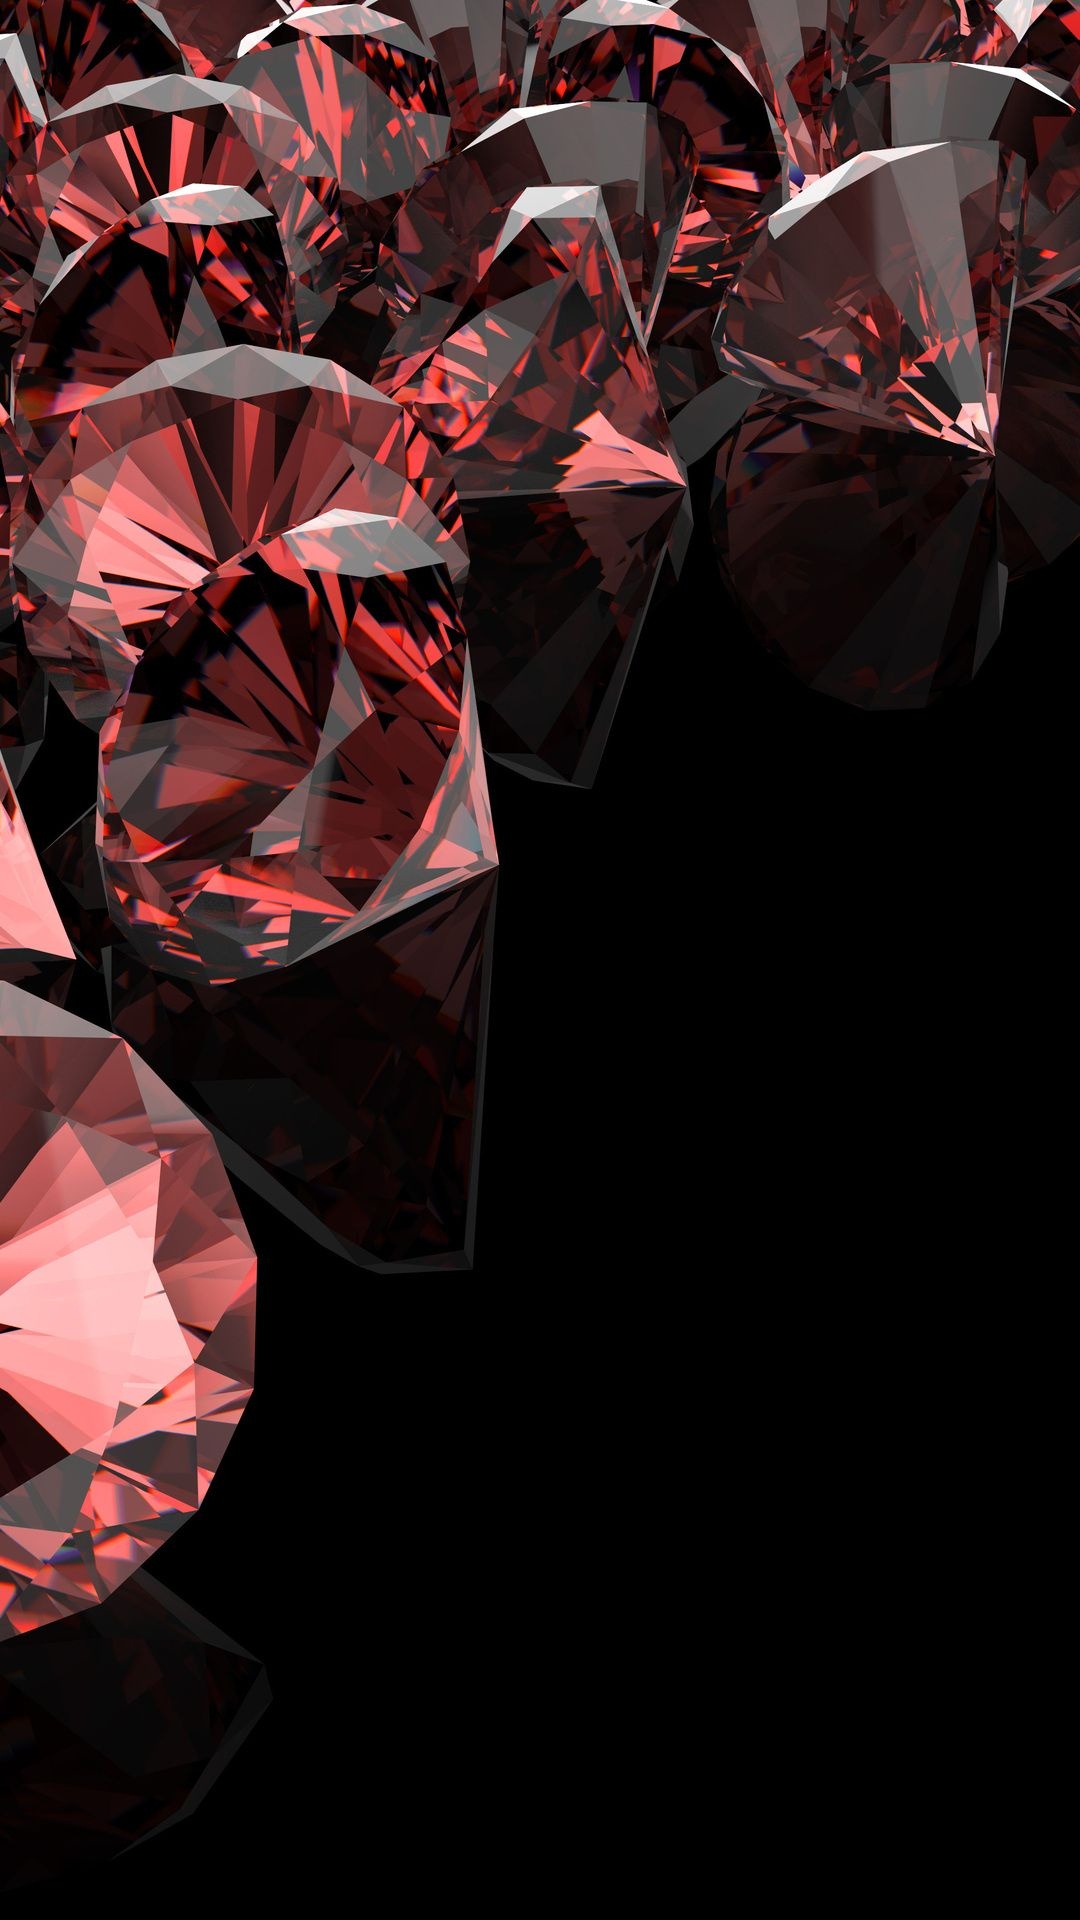 Red diamond wallpapers, Fiery beauty, Passionate allure, Dazzling gemstones, 1080x1920 Full HD Phone